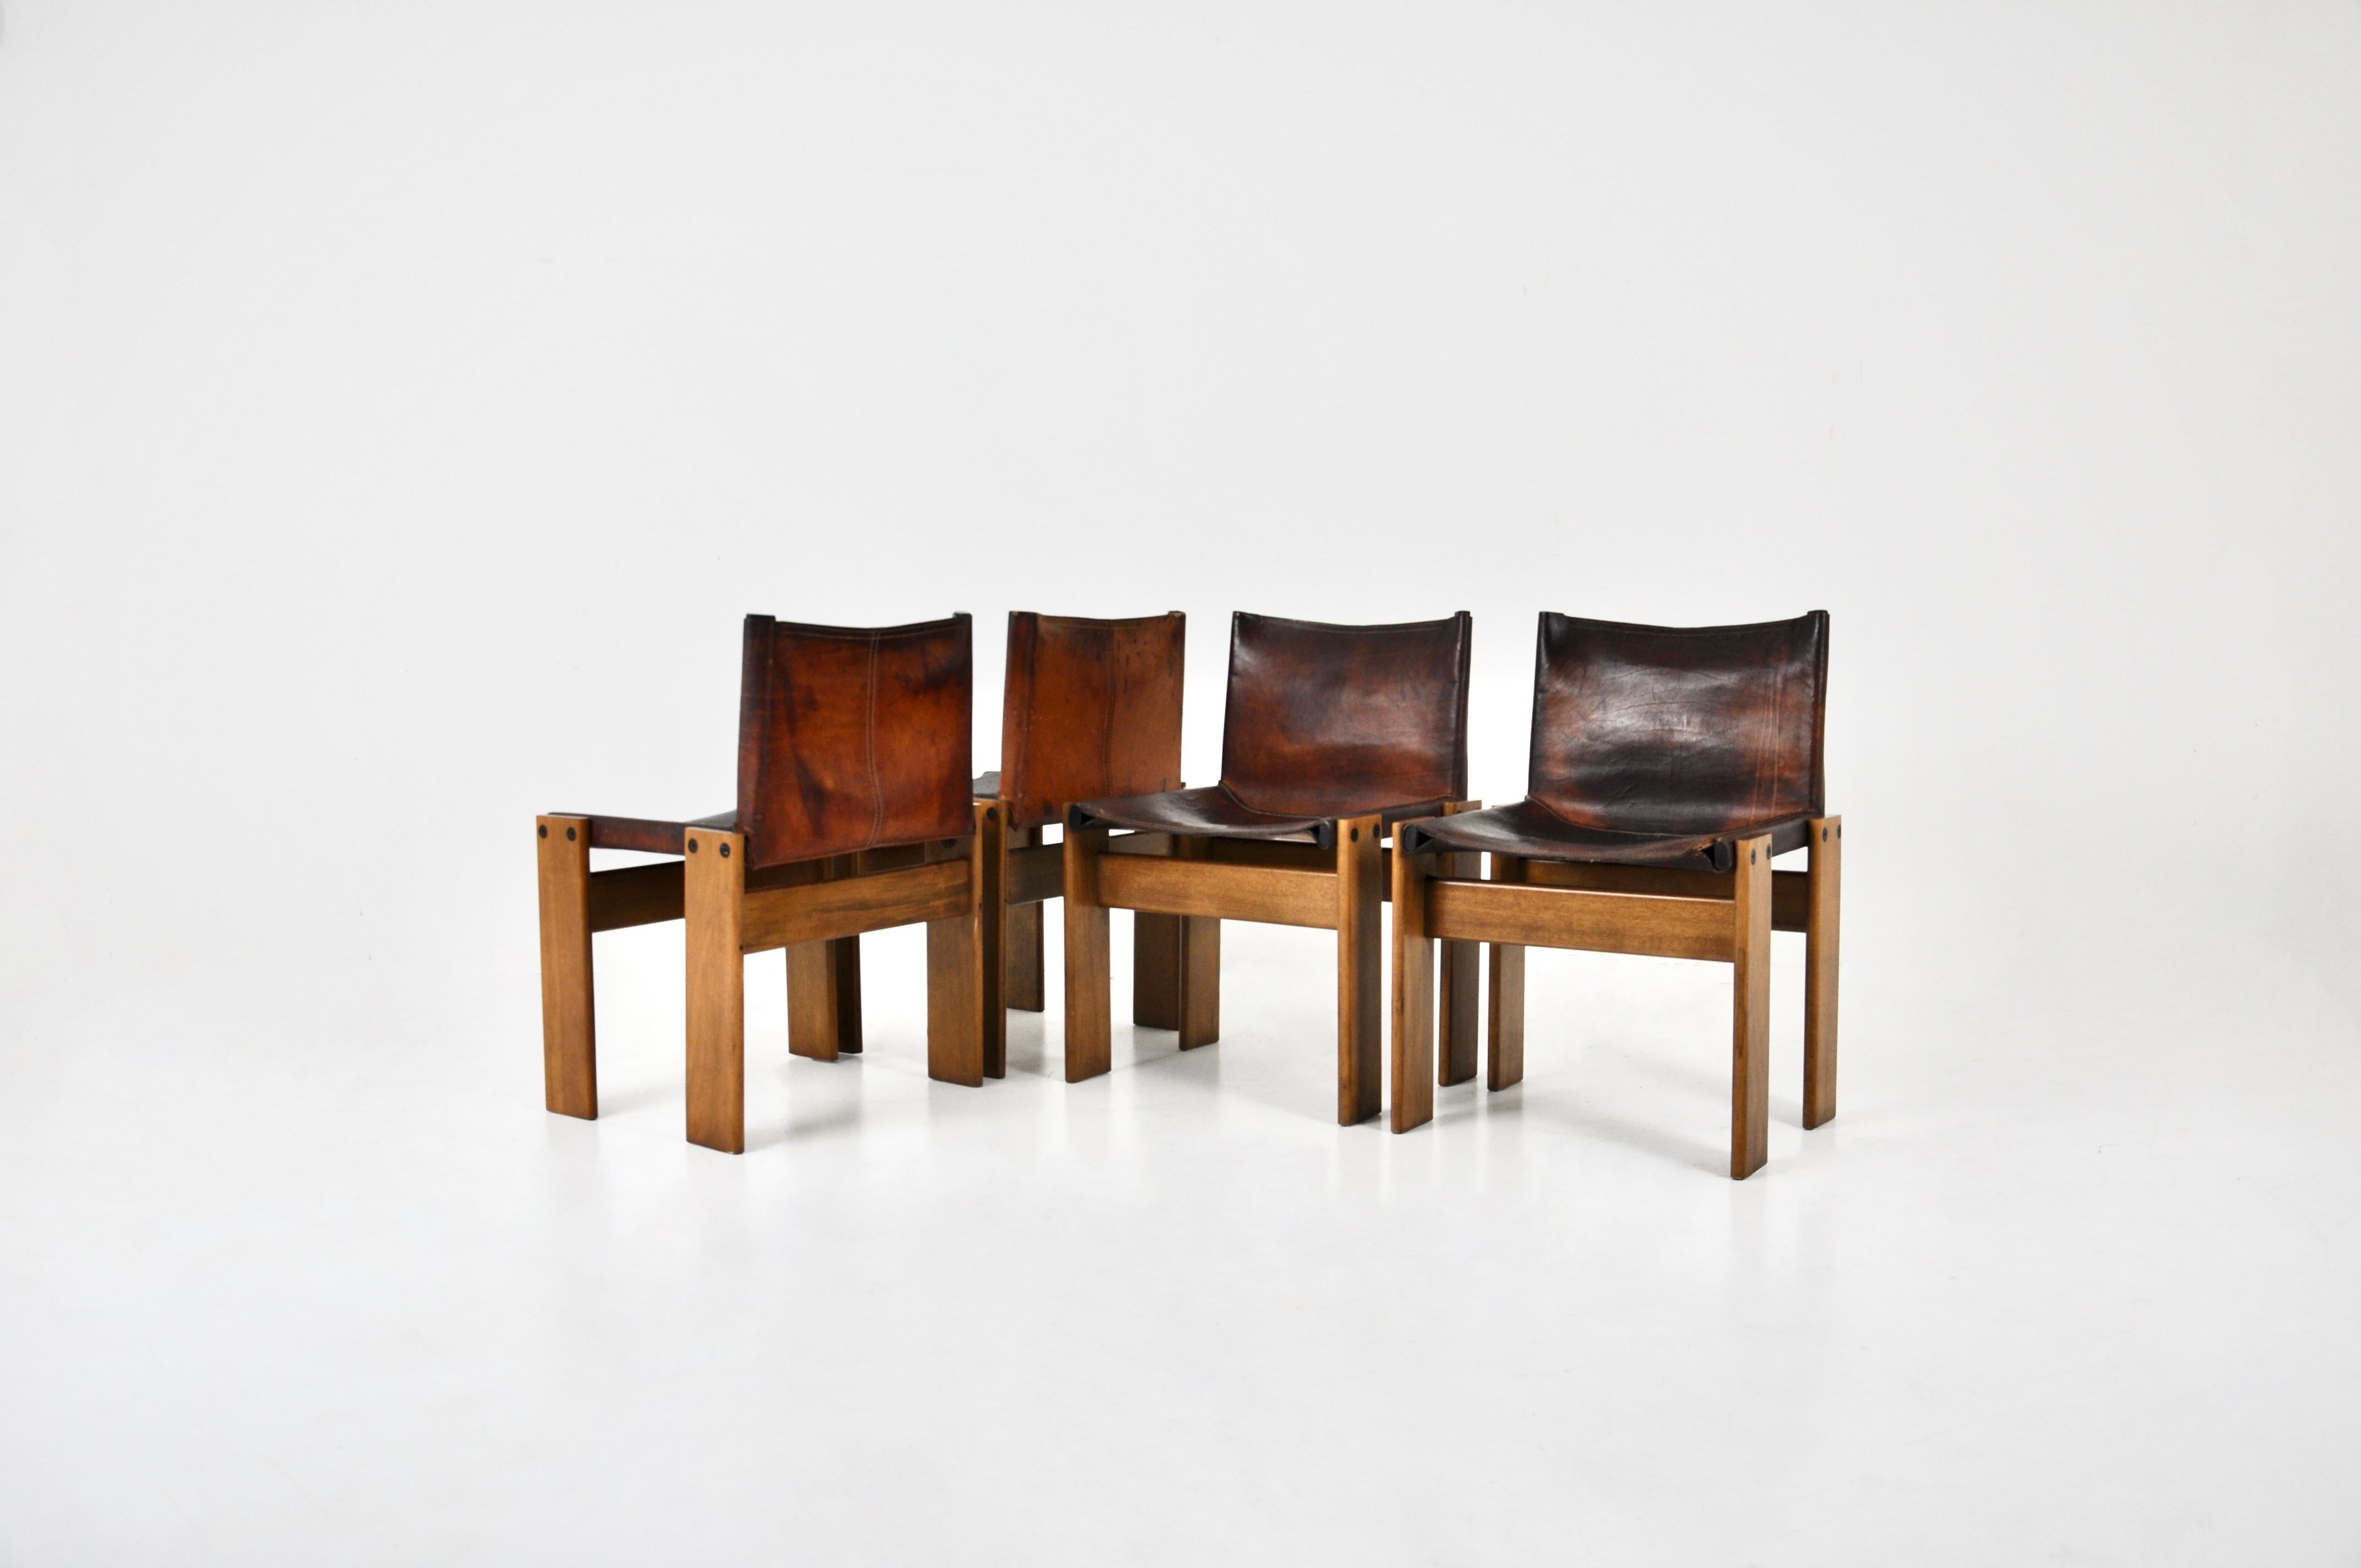 Set of 4 chairs in brown leather and wood designed by Afra & Tobia Scarpa. Model: Monk. Seat height: 43cm Wear due to time and age of the chairs.
 